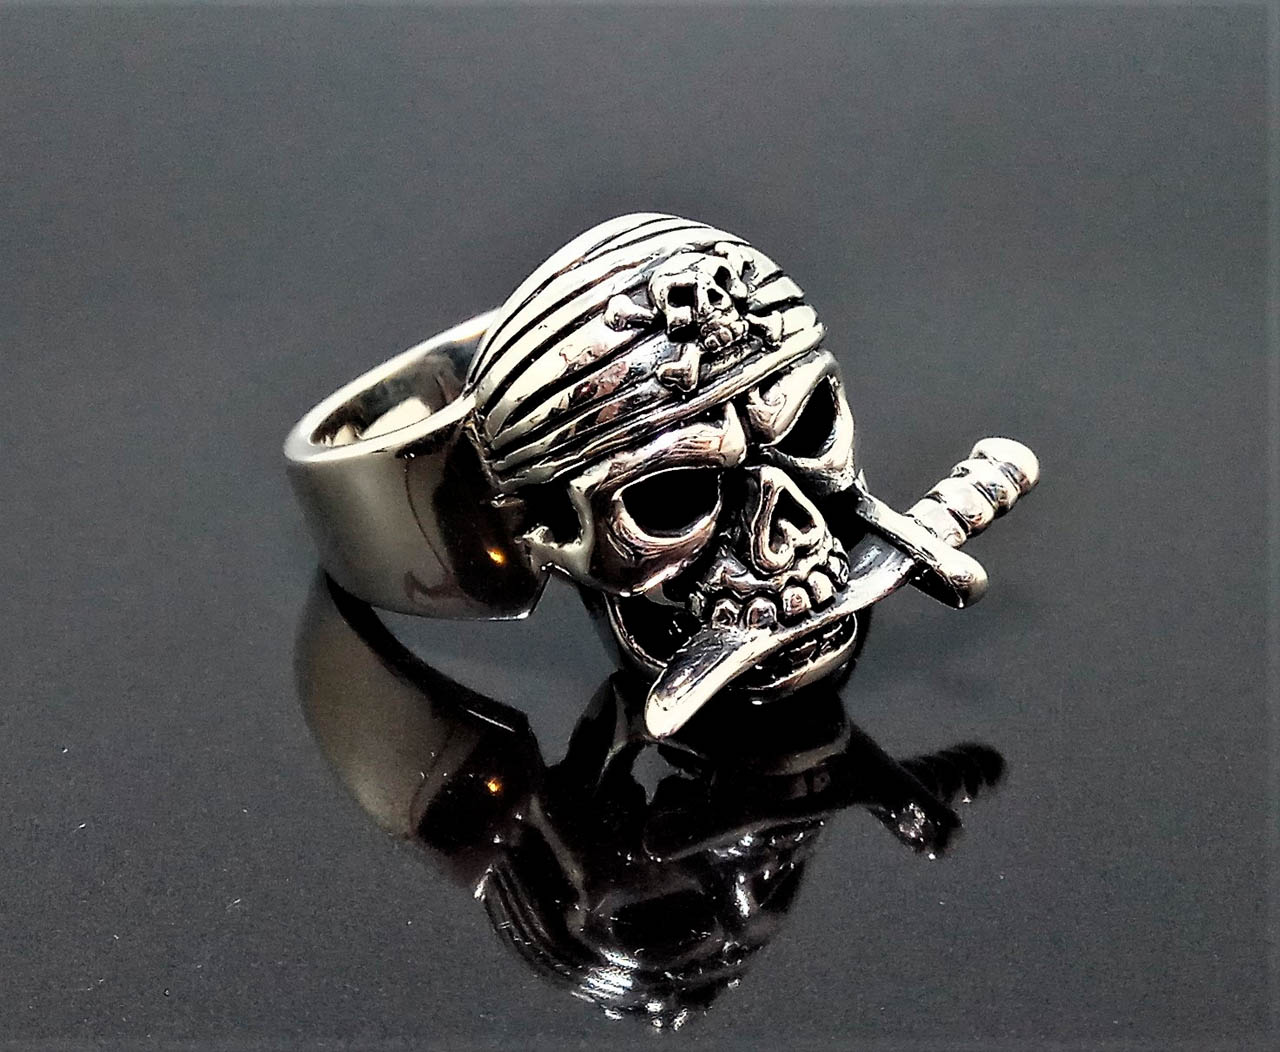 Silver Exclusive Jewelry Design Gems Pirate 925 Knife Skull - Grams ELIZ Ring 18 Biker goth rocker and Sterling Pirate with Heavy